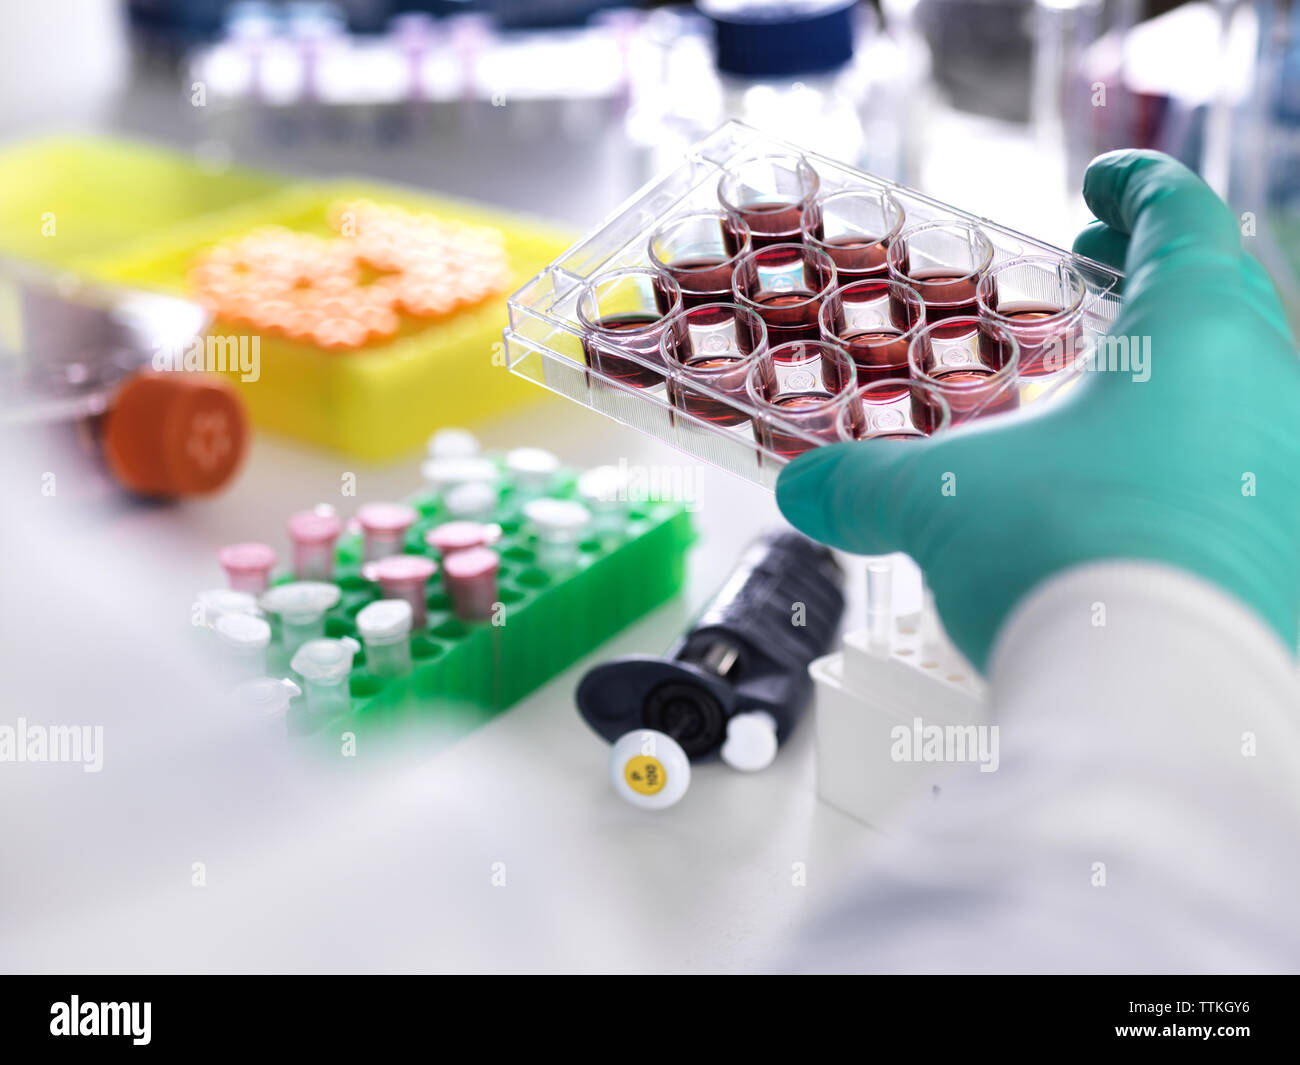 Cropped hand of scientist wearing protective glove holding multiwell tray containing stem cells during cancer research in laboratory Stock Photo